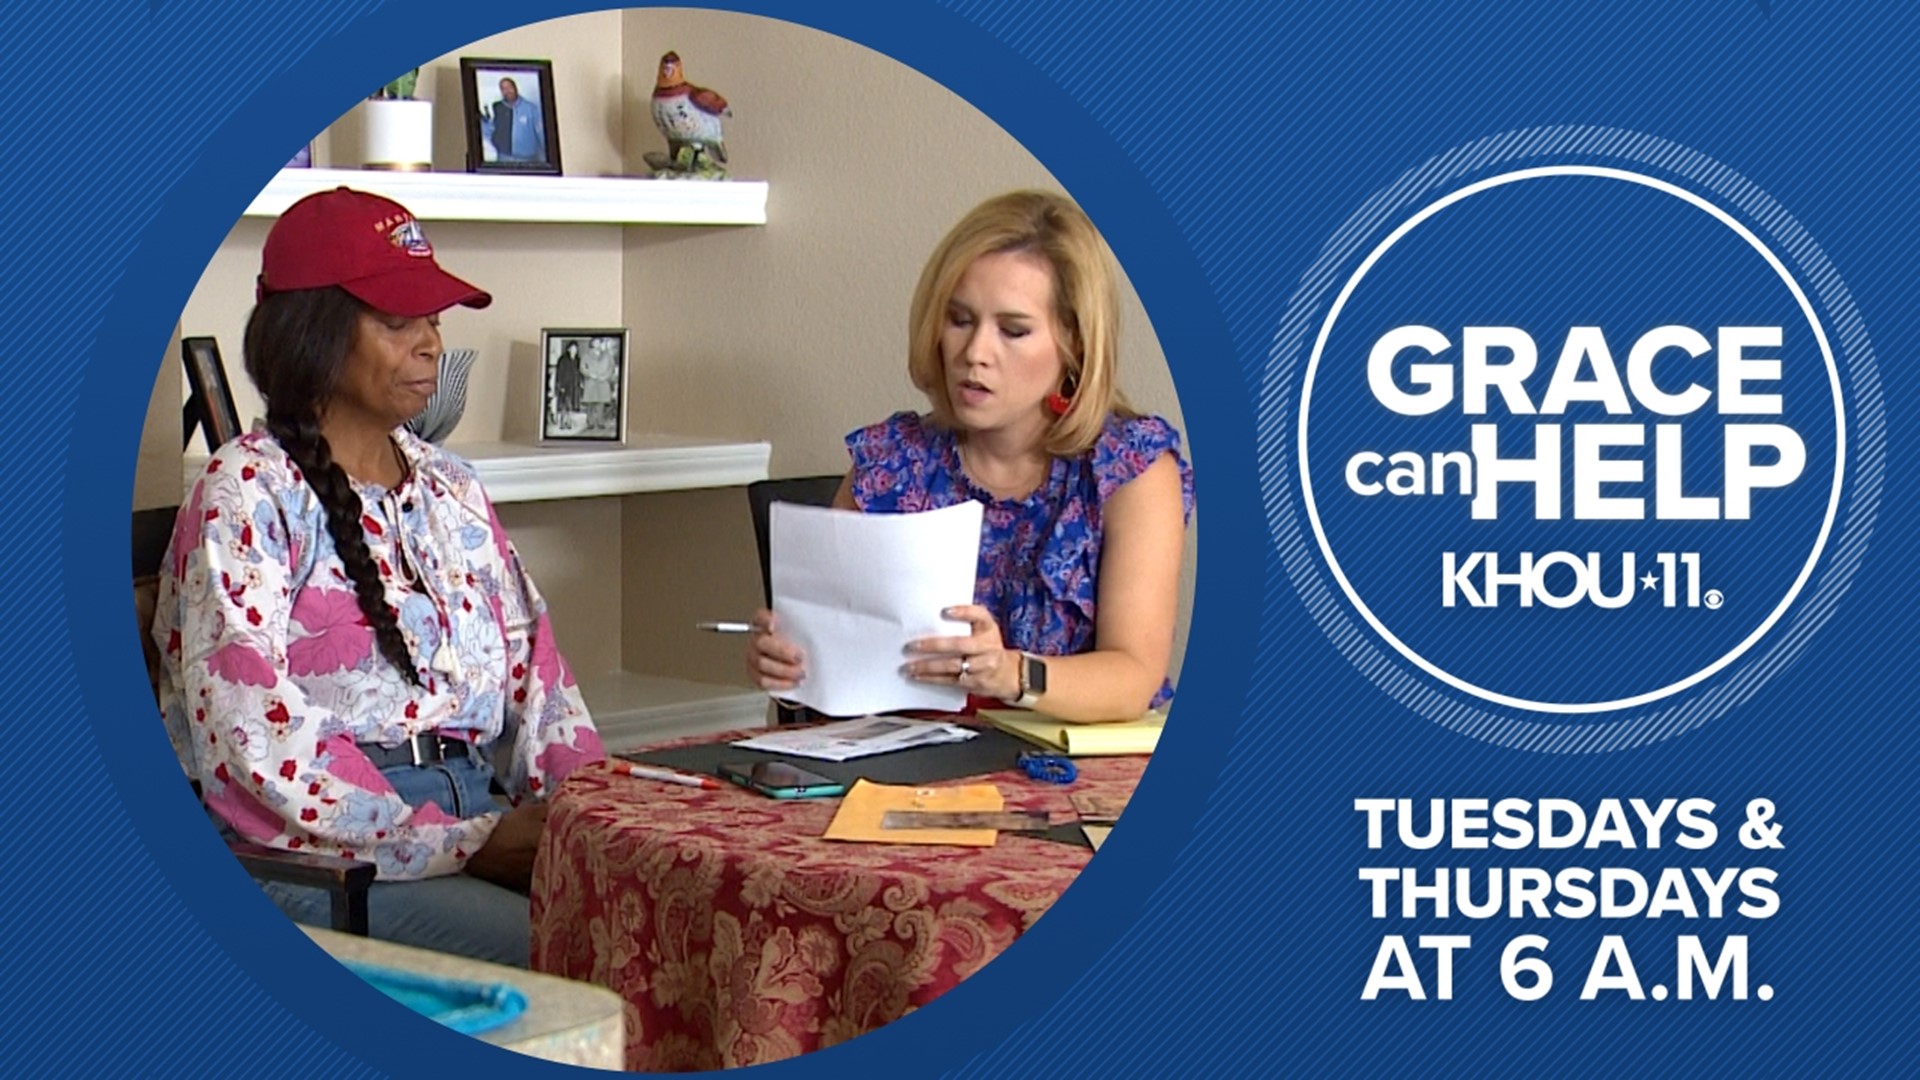 Tuesdays and Thursdays on KHOU 11 Morning News. Contact Grace White by calling 713-521-HELP, emailing GraceCanHelp@khou.com or visiting KHOU.com/GraceCanHelp